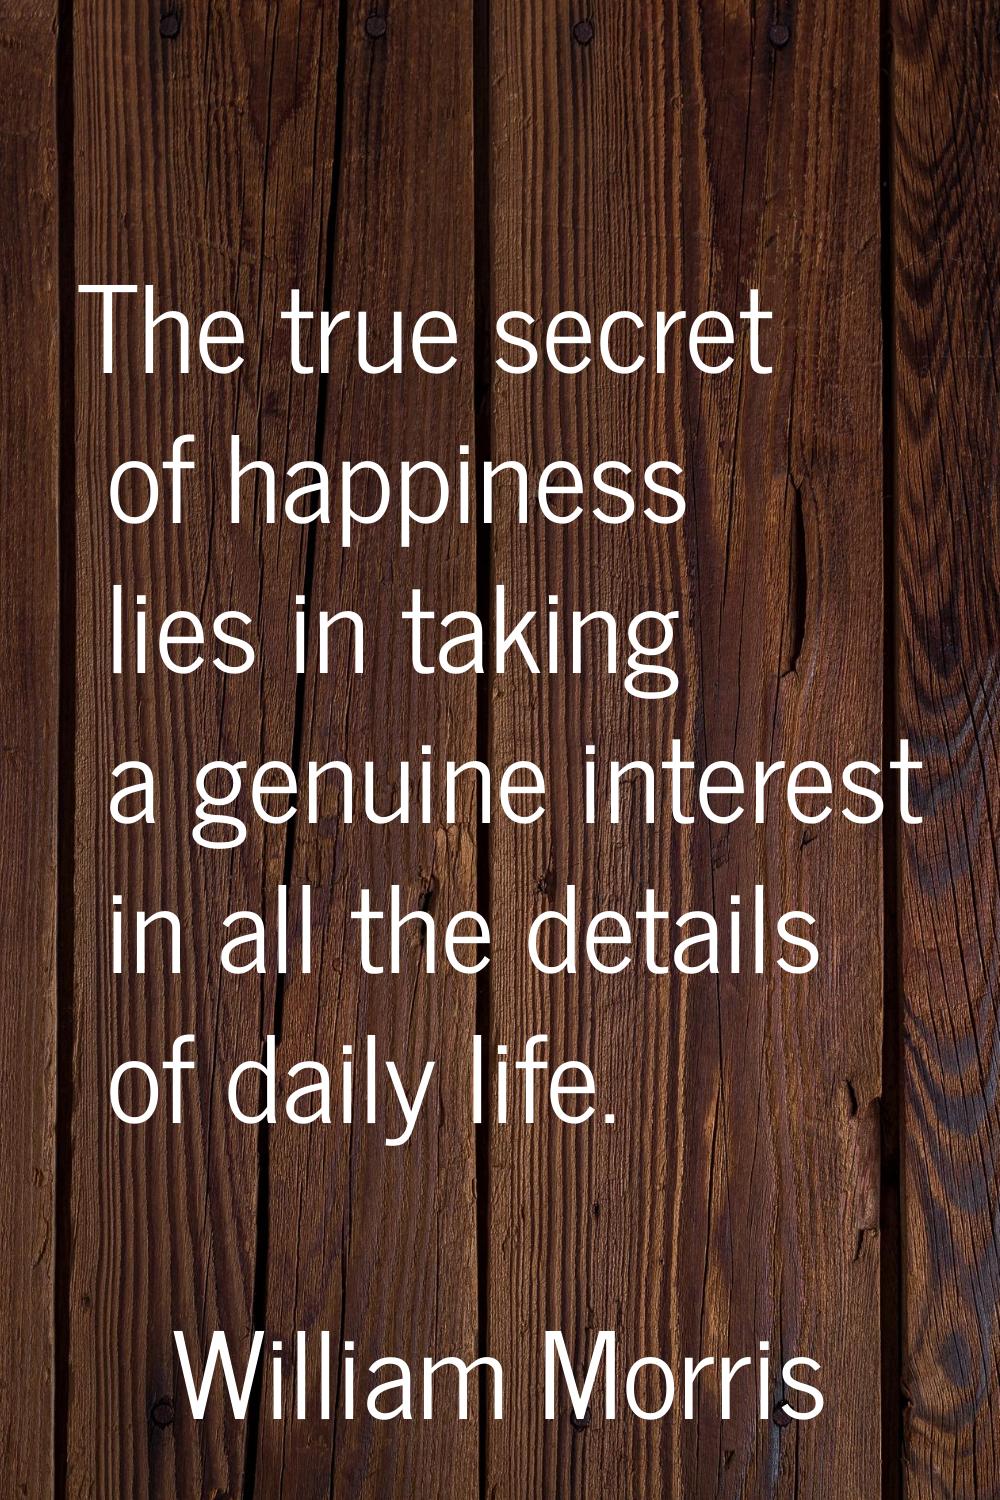 The true secret of happiness lies in taking a genuine interest in all the details of daily life.